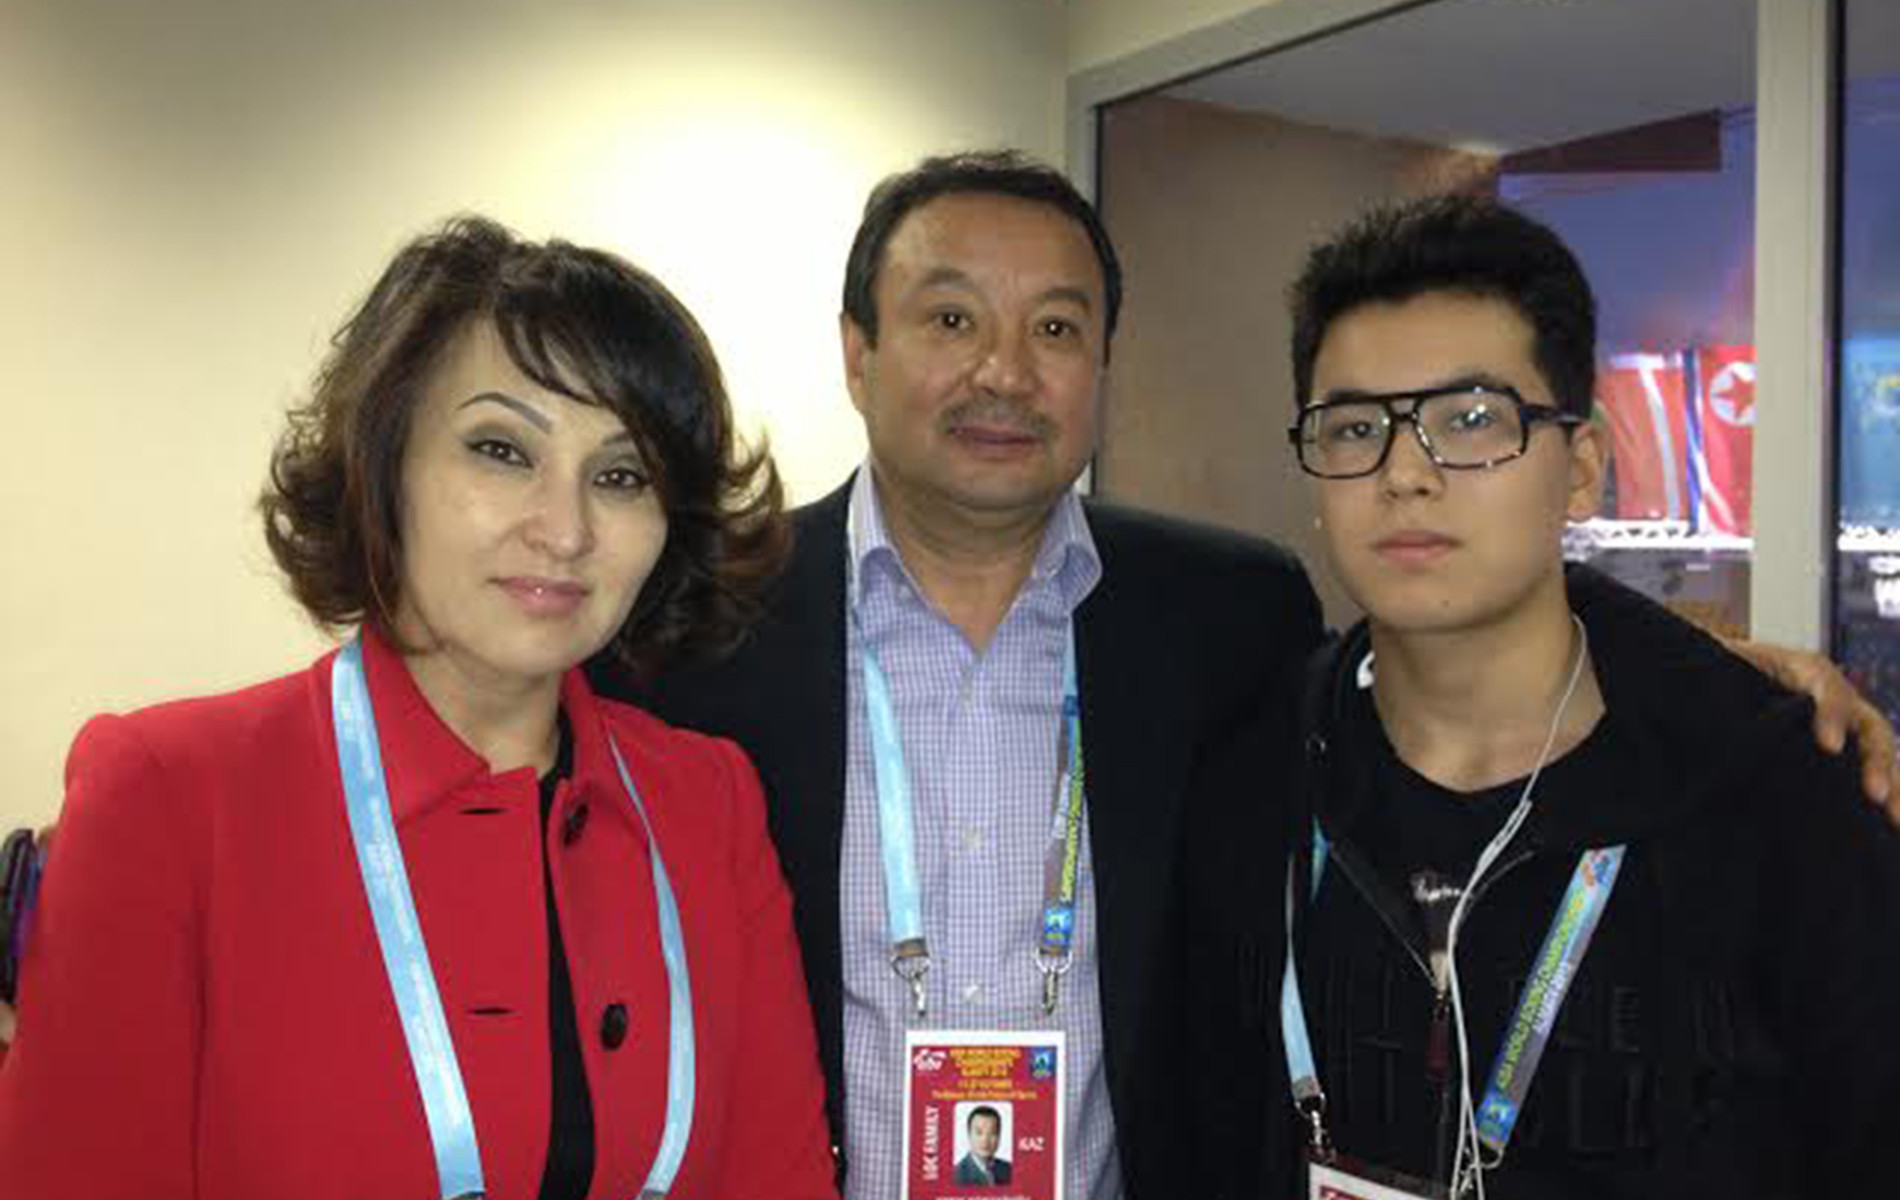 Konakbayev cleared to resume AIBA President campaign prior to CAS decision on eligibility